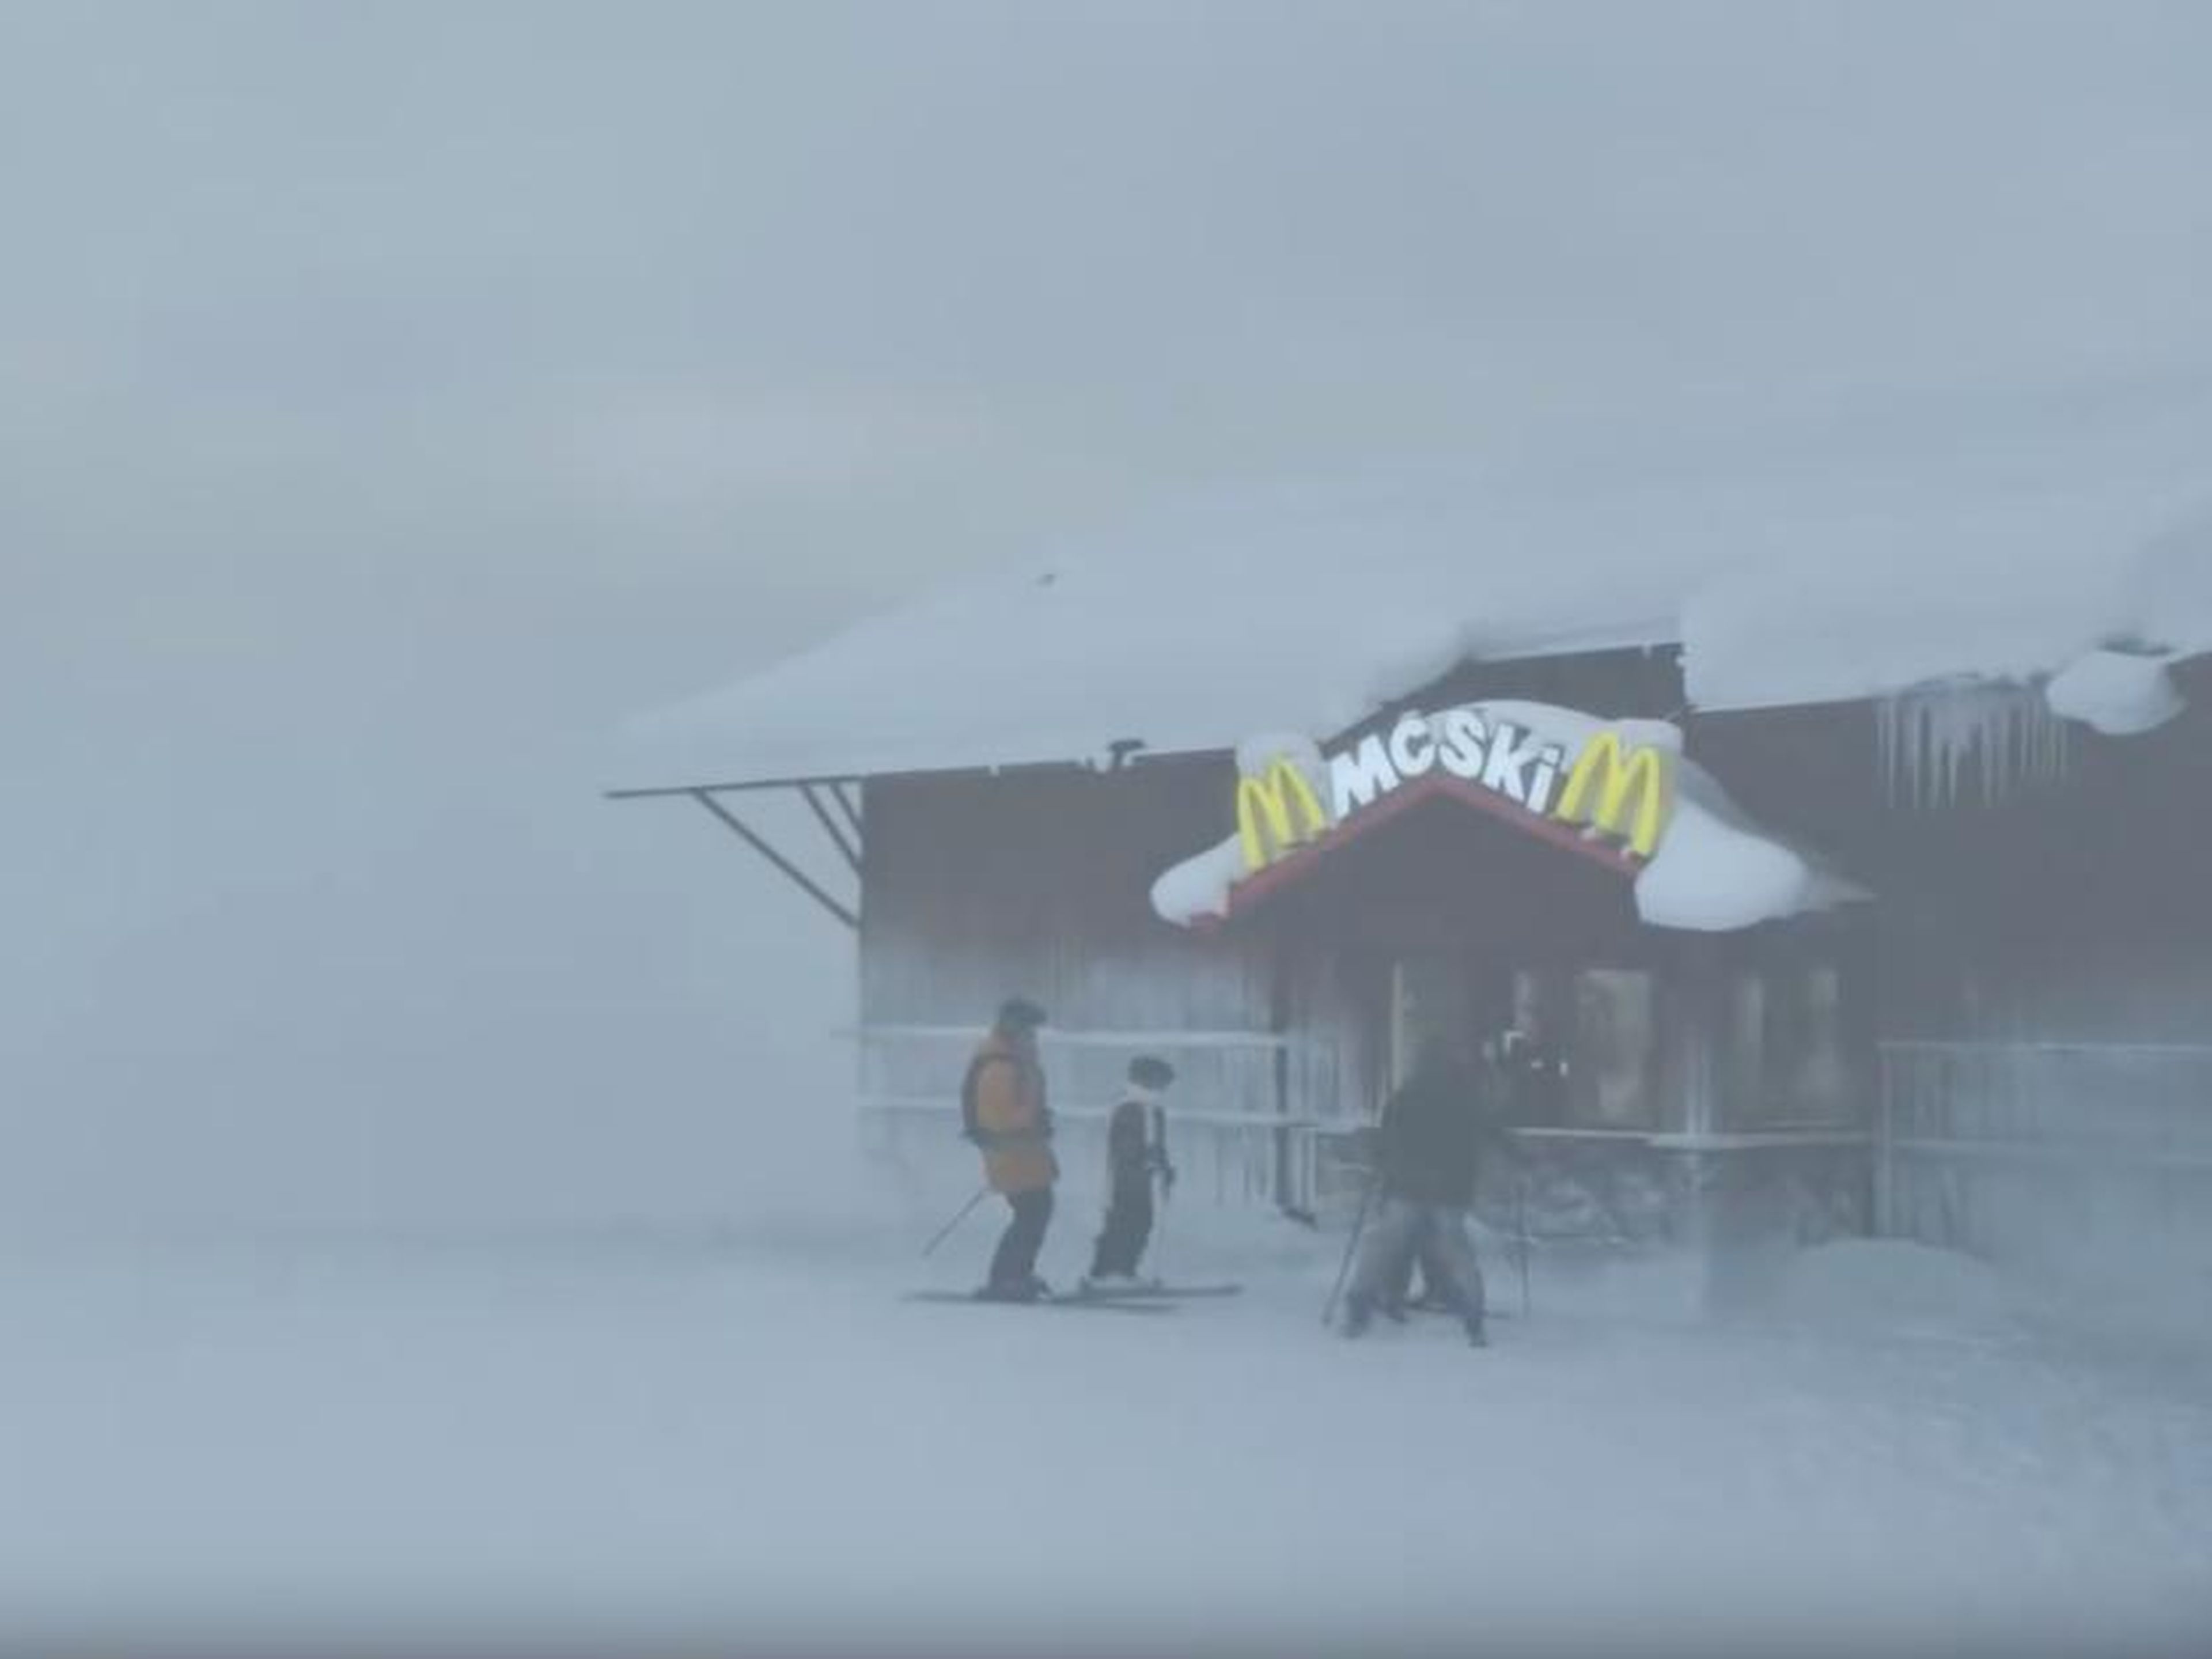 It opened in 1996 and is the first ski-up McDonald's.